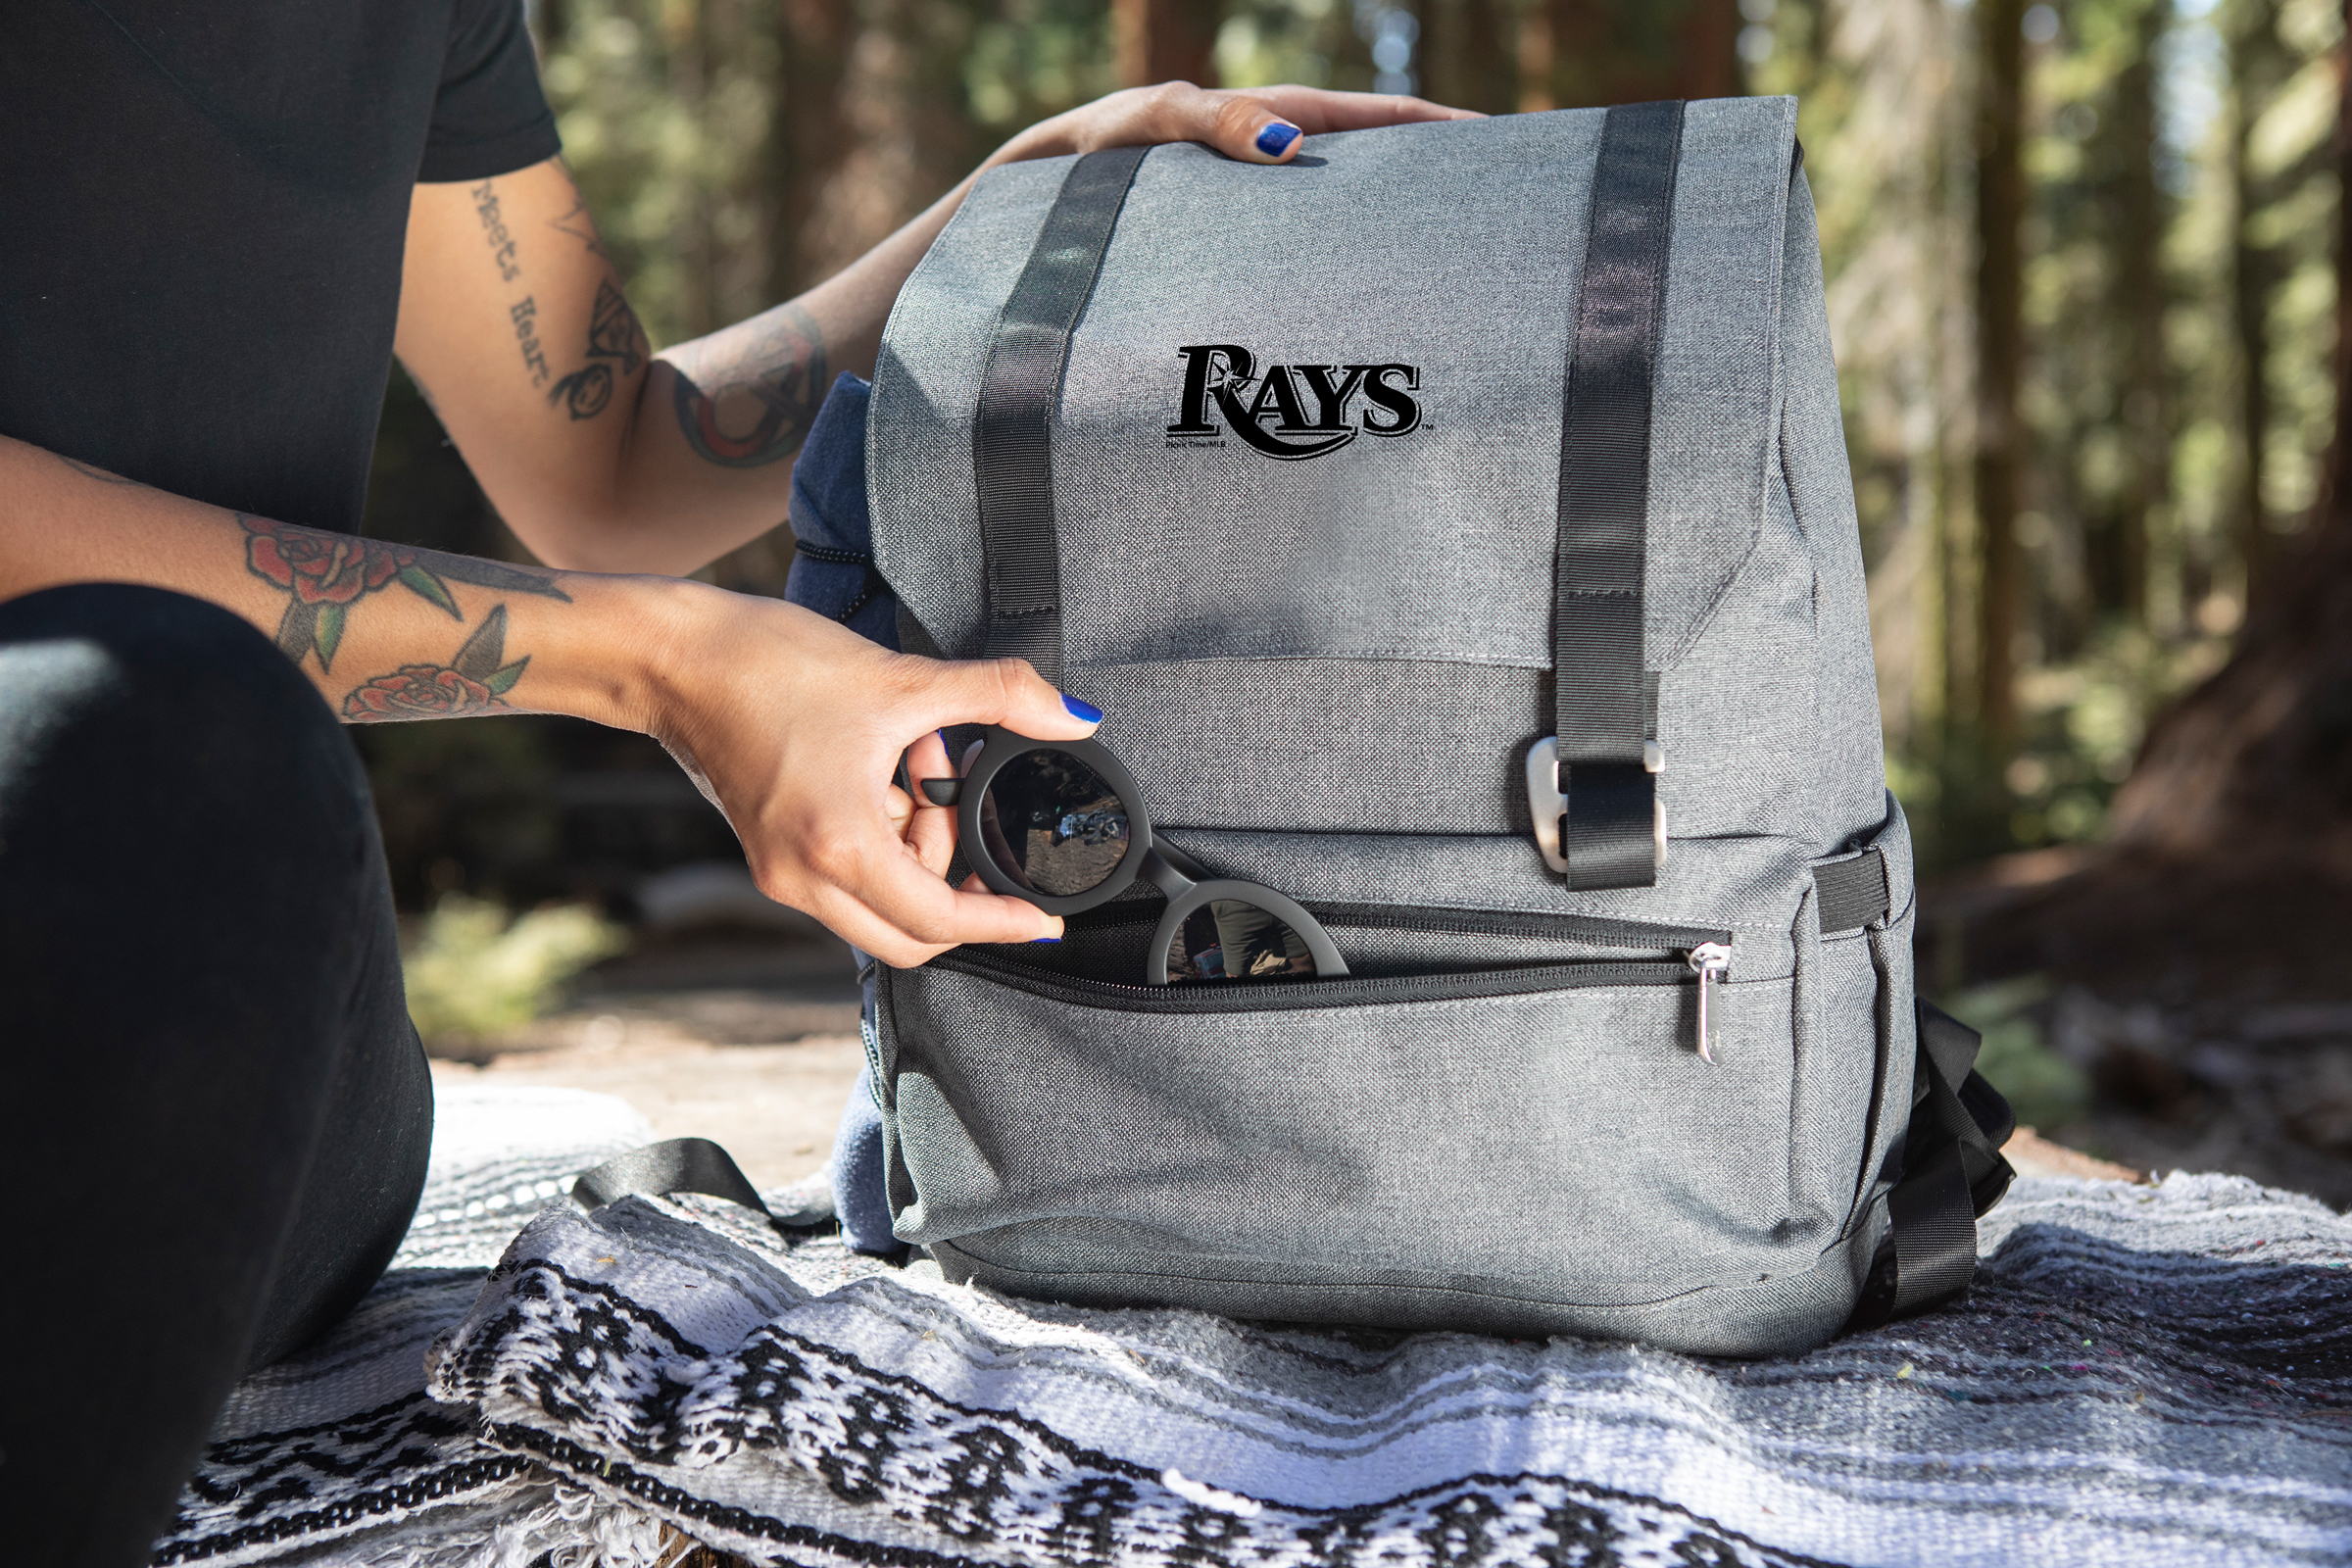 Tampa Bay Rays - On The Go Traverse Backpack Cooler